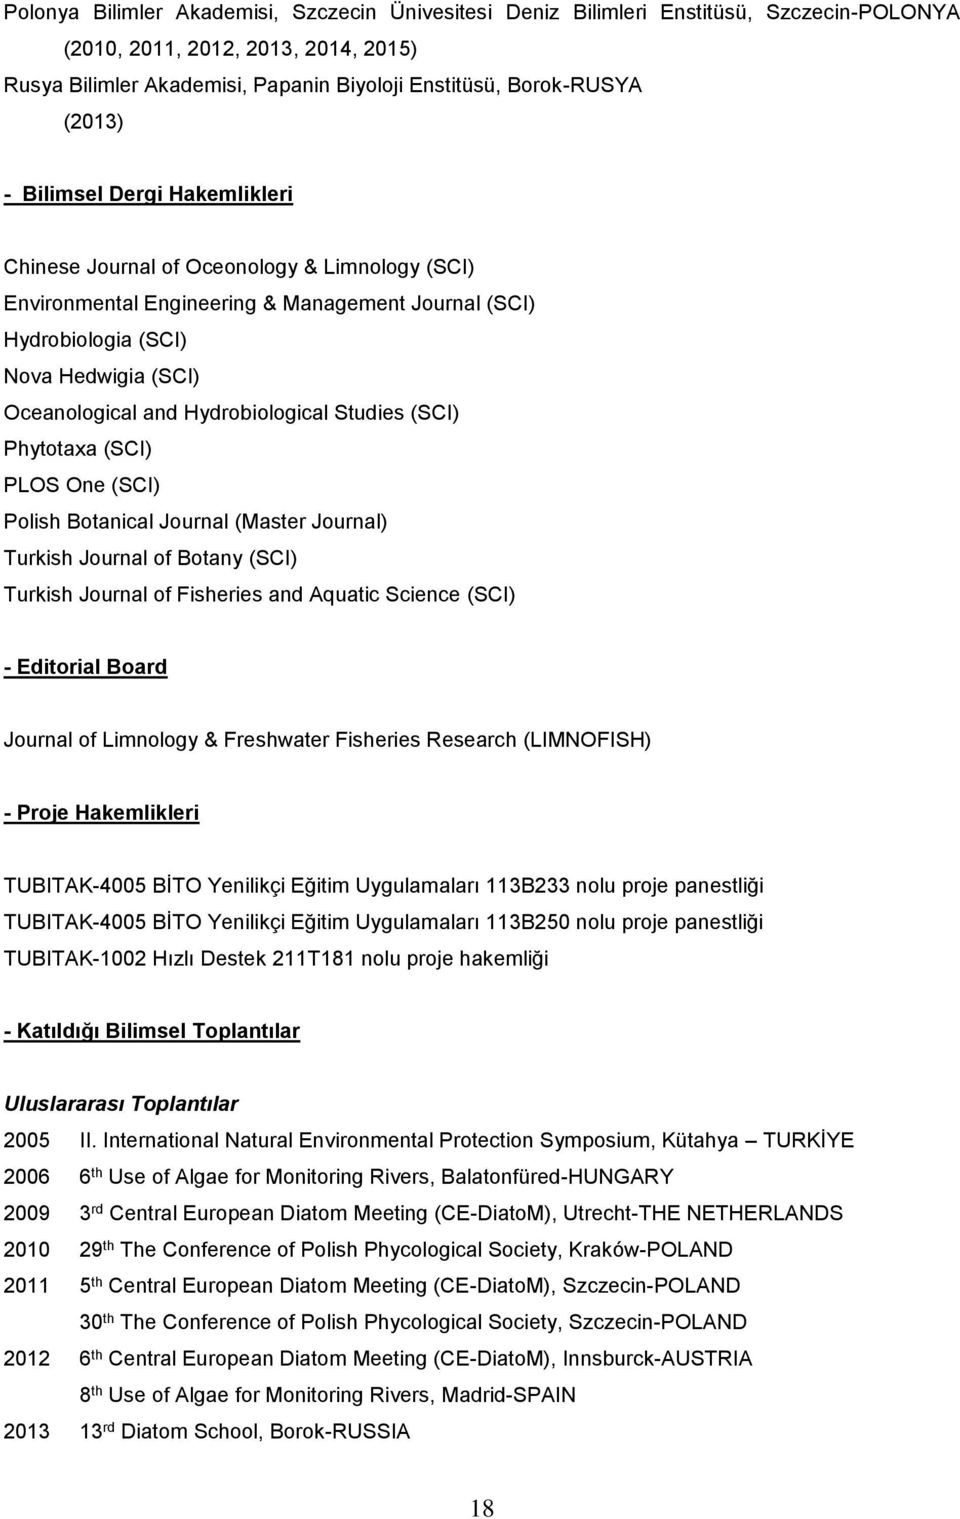 Hydrobiological Studies (SCI) Phytotaxa (SCI) PLOS One (SCI) Polish Botanical Journal (Master Journal) Turkish Journal of Botany (SCI) Turkish Journal of Fisheries and Aquatic Science (SCI) -